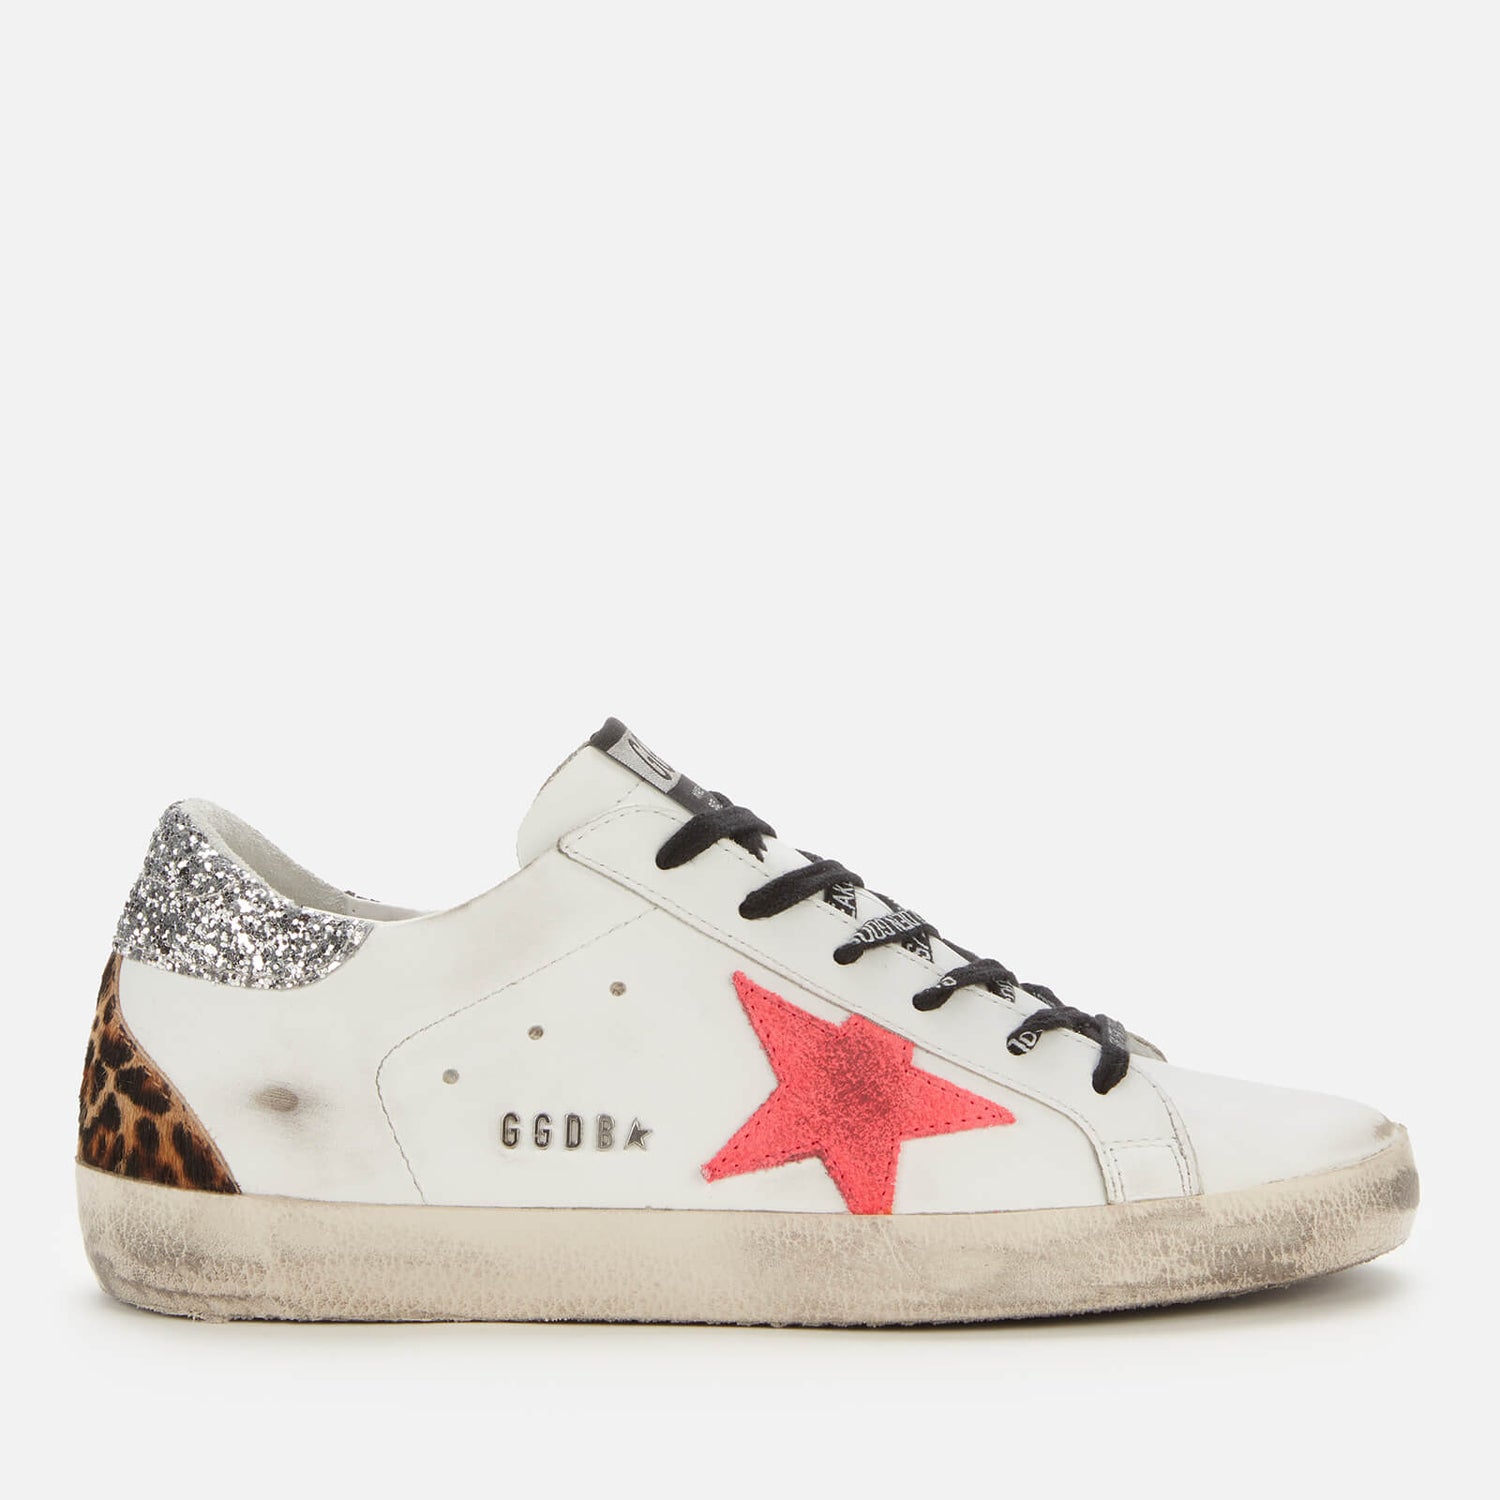 Golden Goose Deluxe Brand Women's Superstar Leather Trainers - White/Fuchsia/Silver - Free UK ...